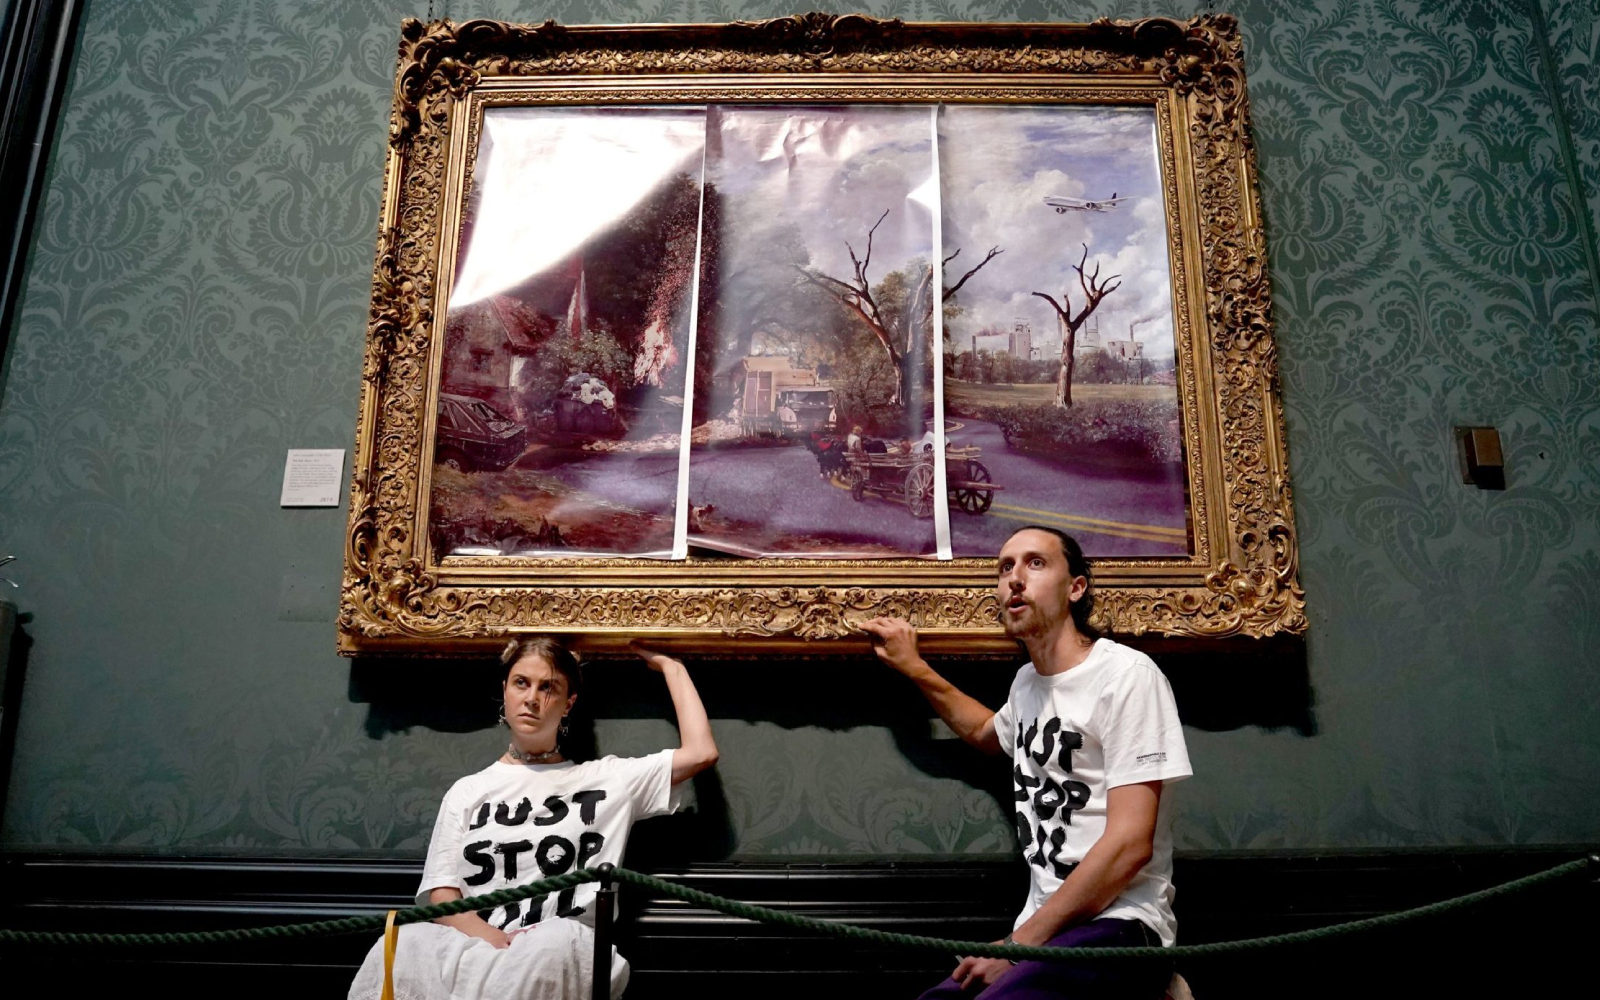 Why climate activists are gluing themself to paintings And what else should we expect